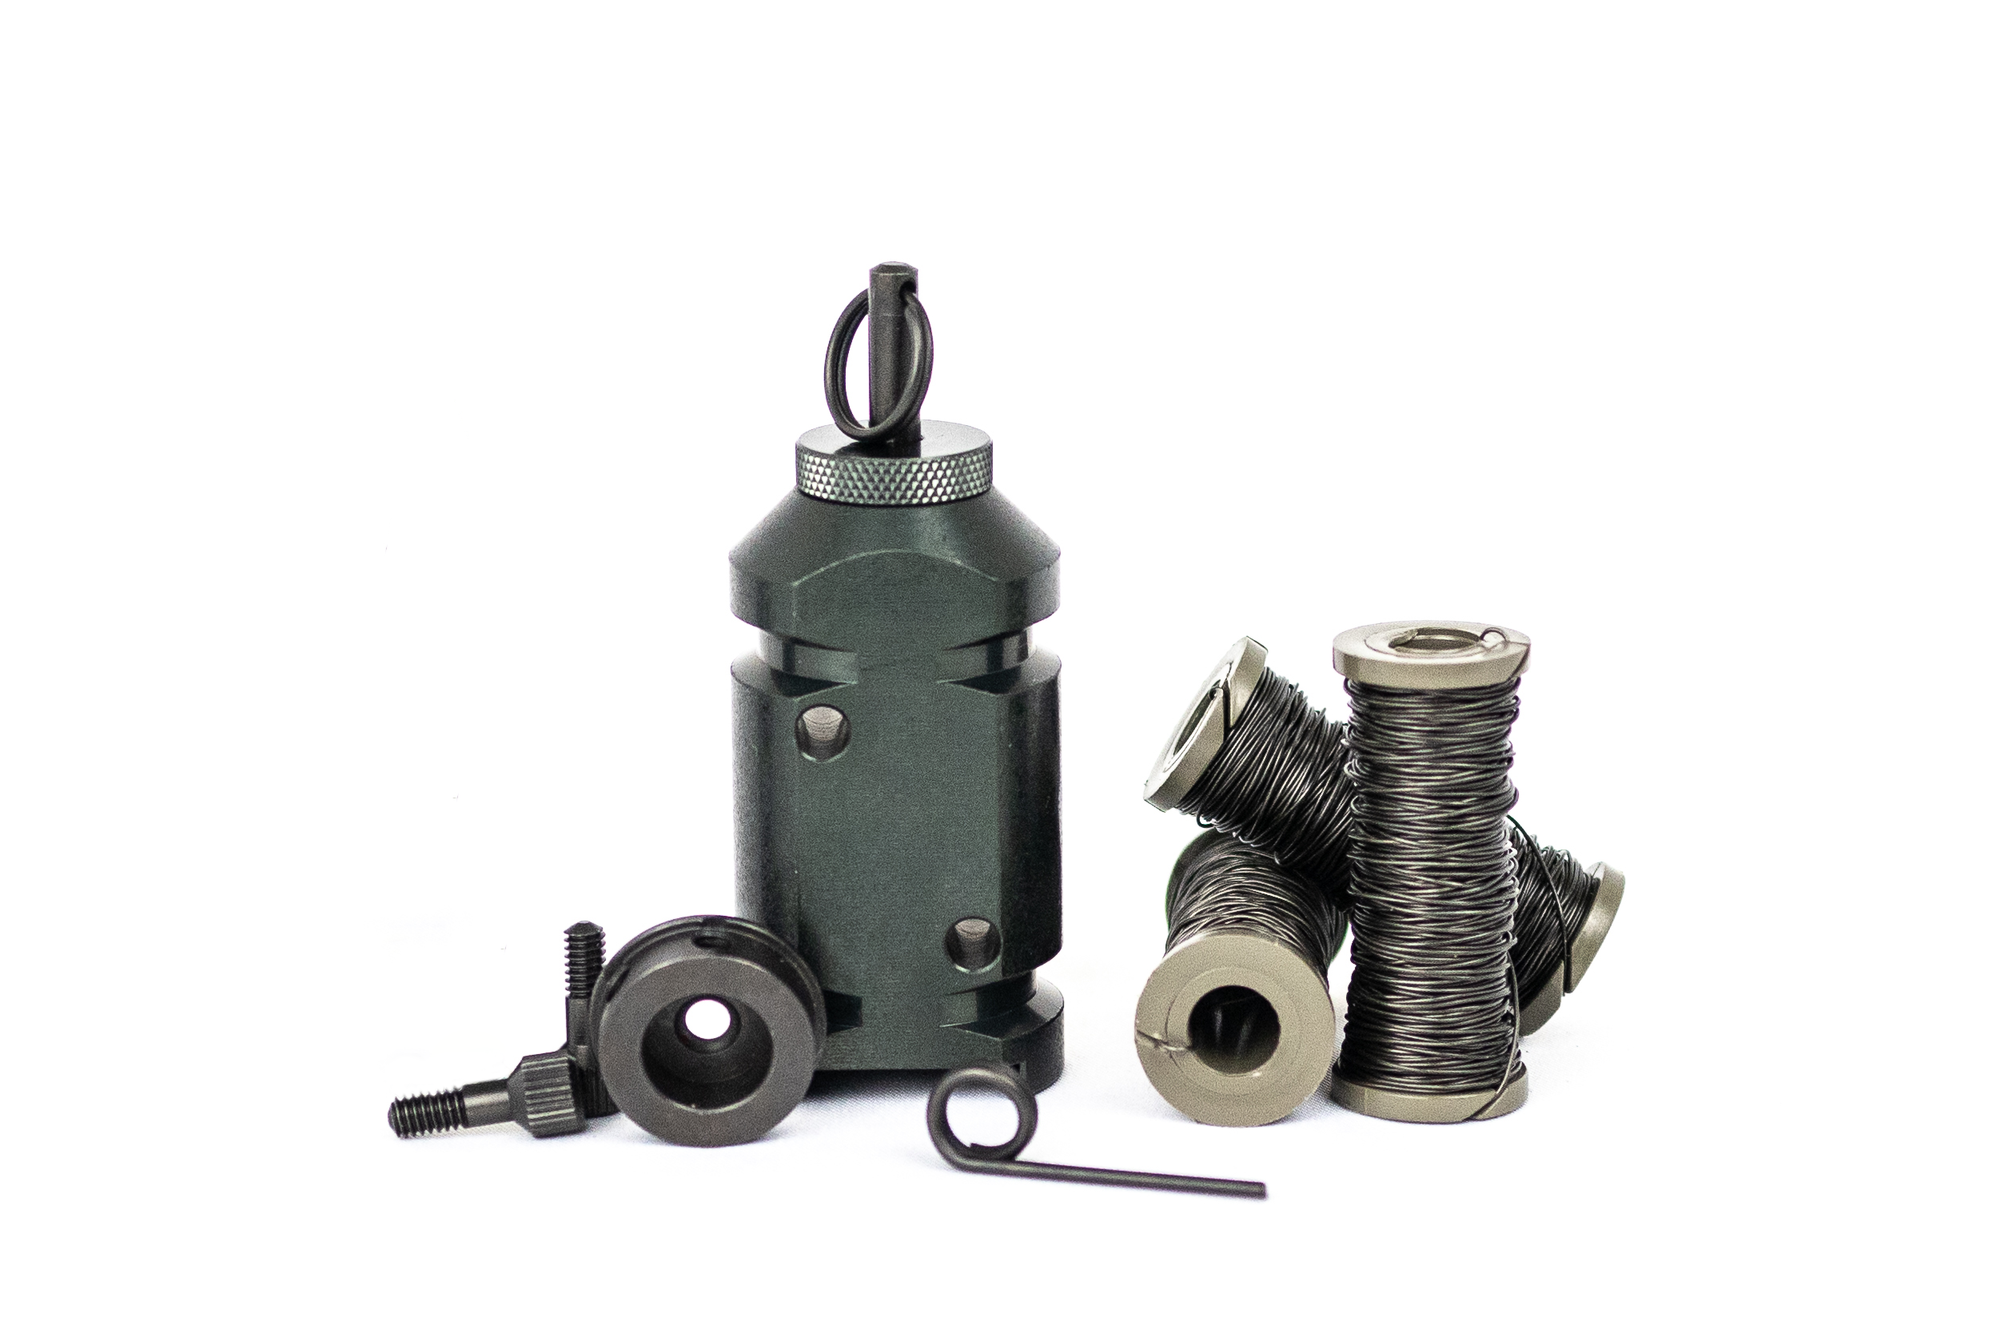 The 12g perimeter trip alarm sitting on its flat bottom, next to the 308 adapter on its side, with 3 spools of military trip wire. Complete kit for camping, hiking, backpacking